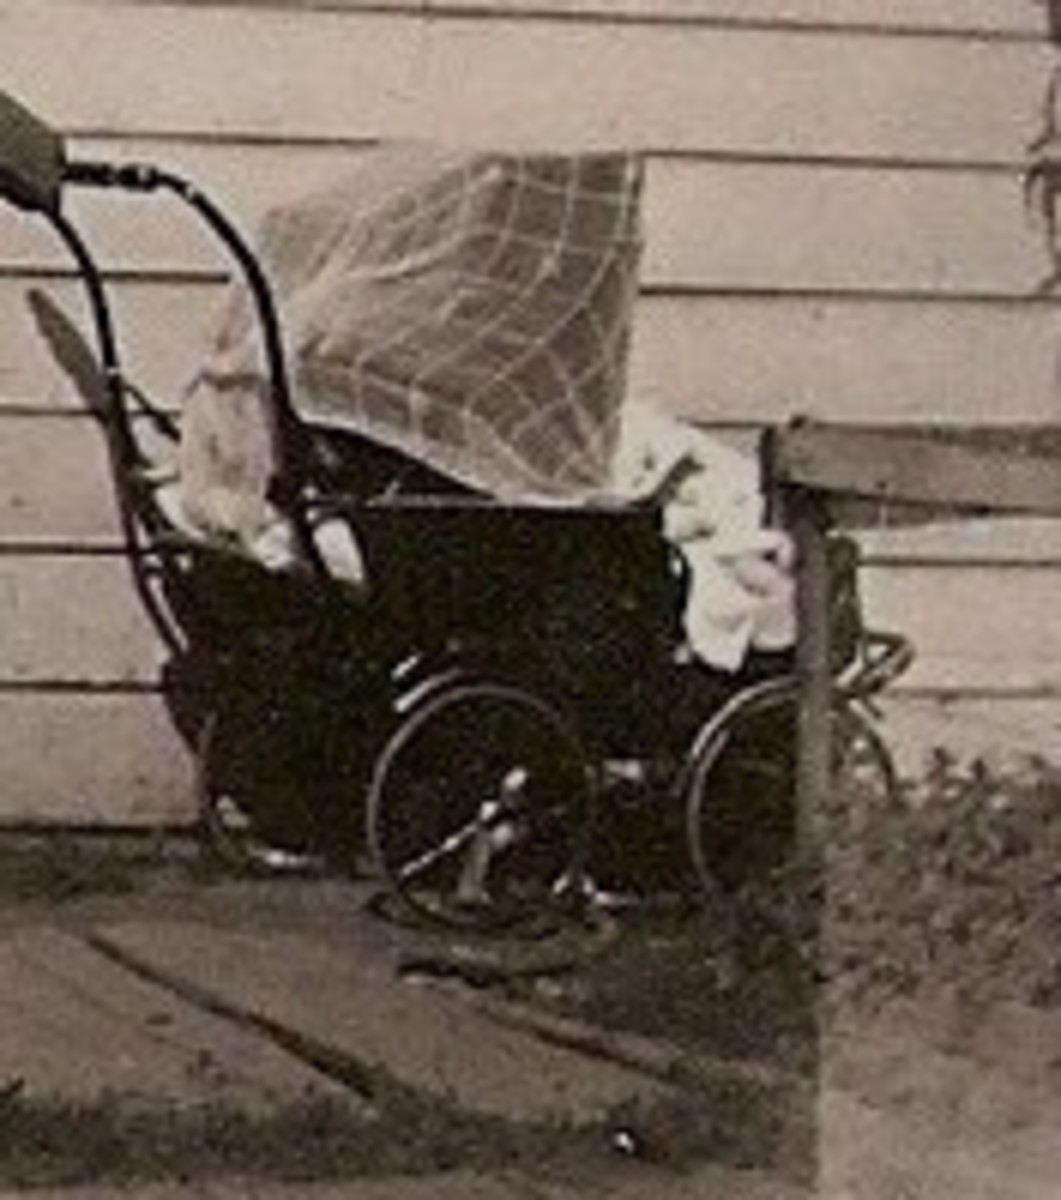 From my personal collection, photo of an era baby carriage.